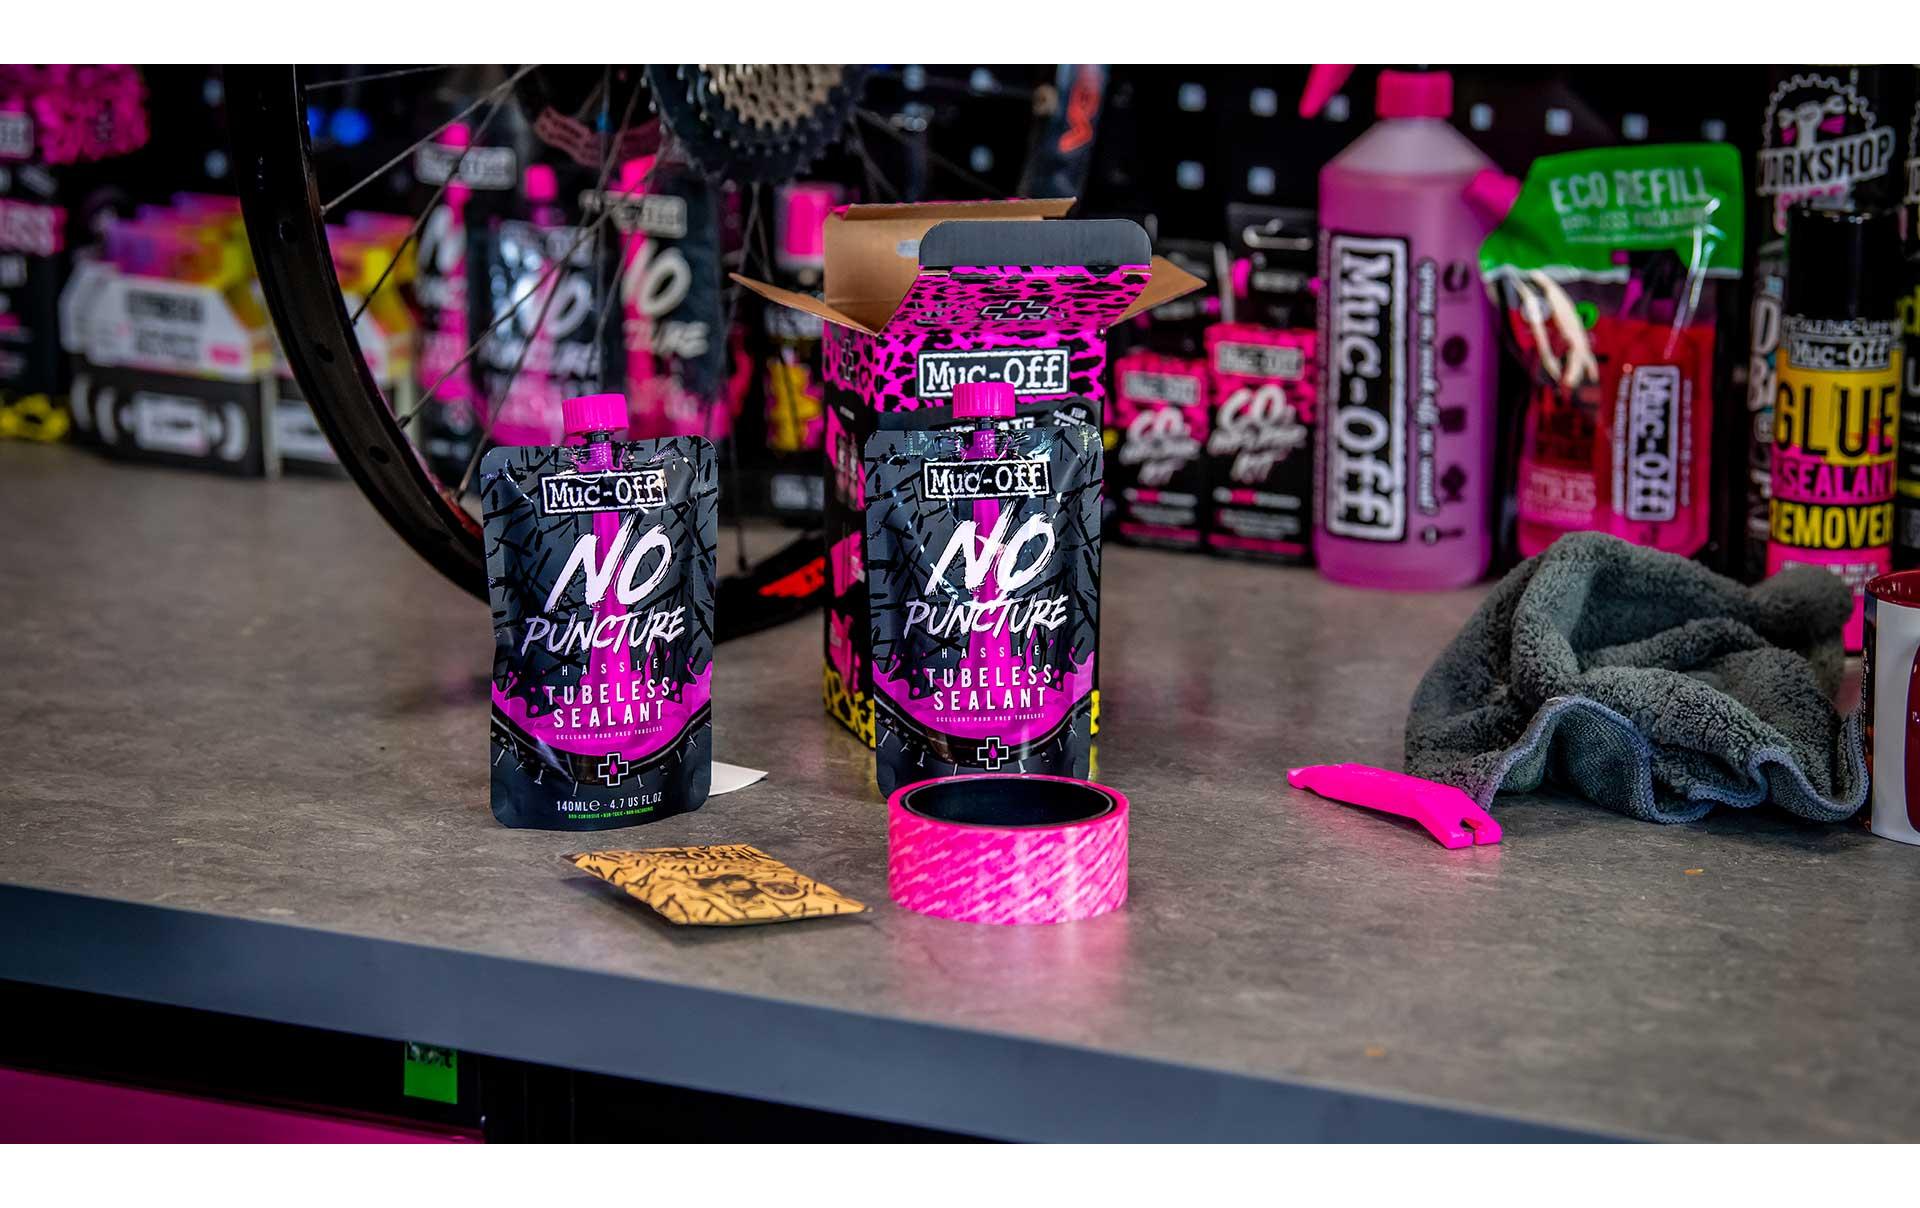 Muc-Off Ultimate Tubless Kit Road 44 mm